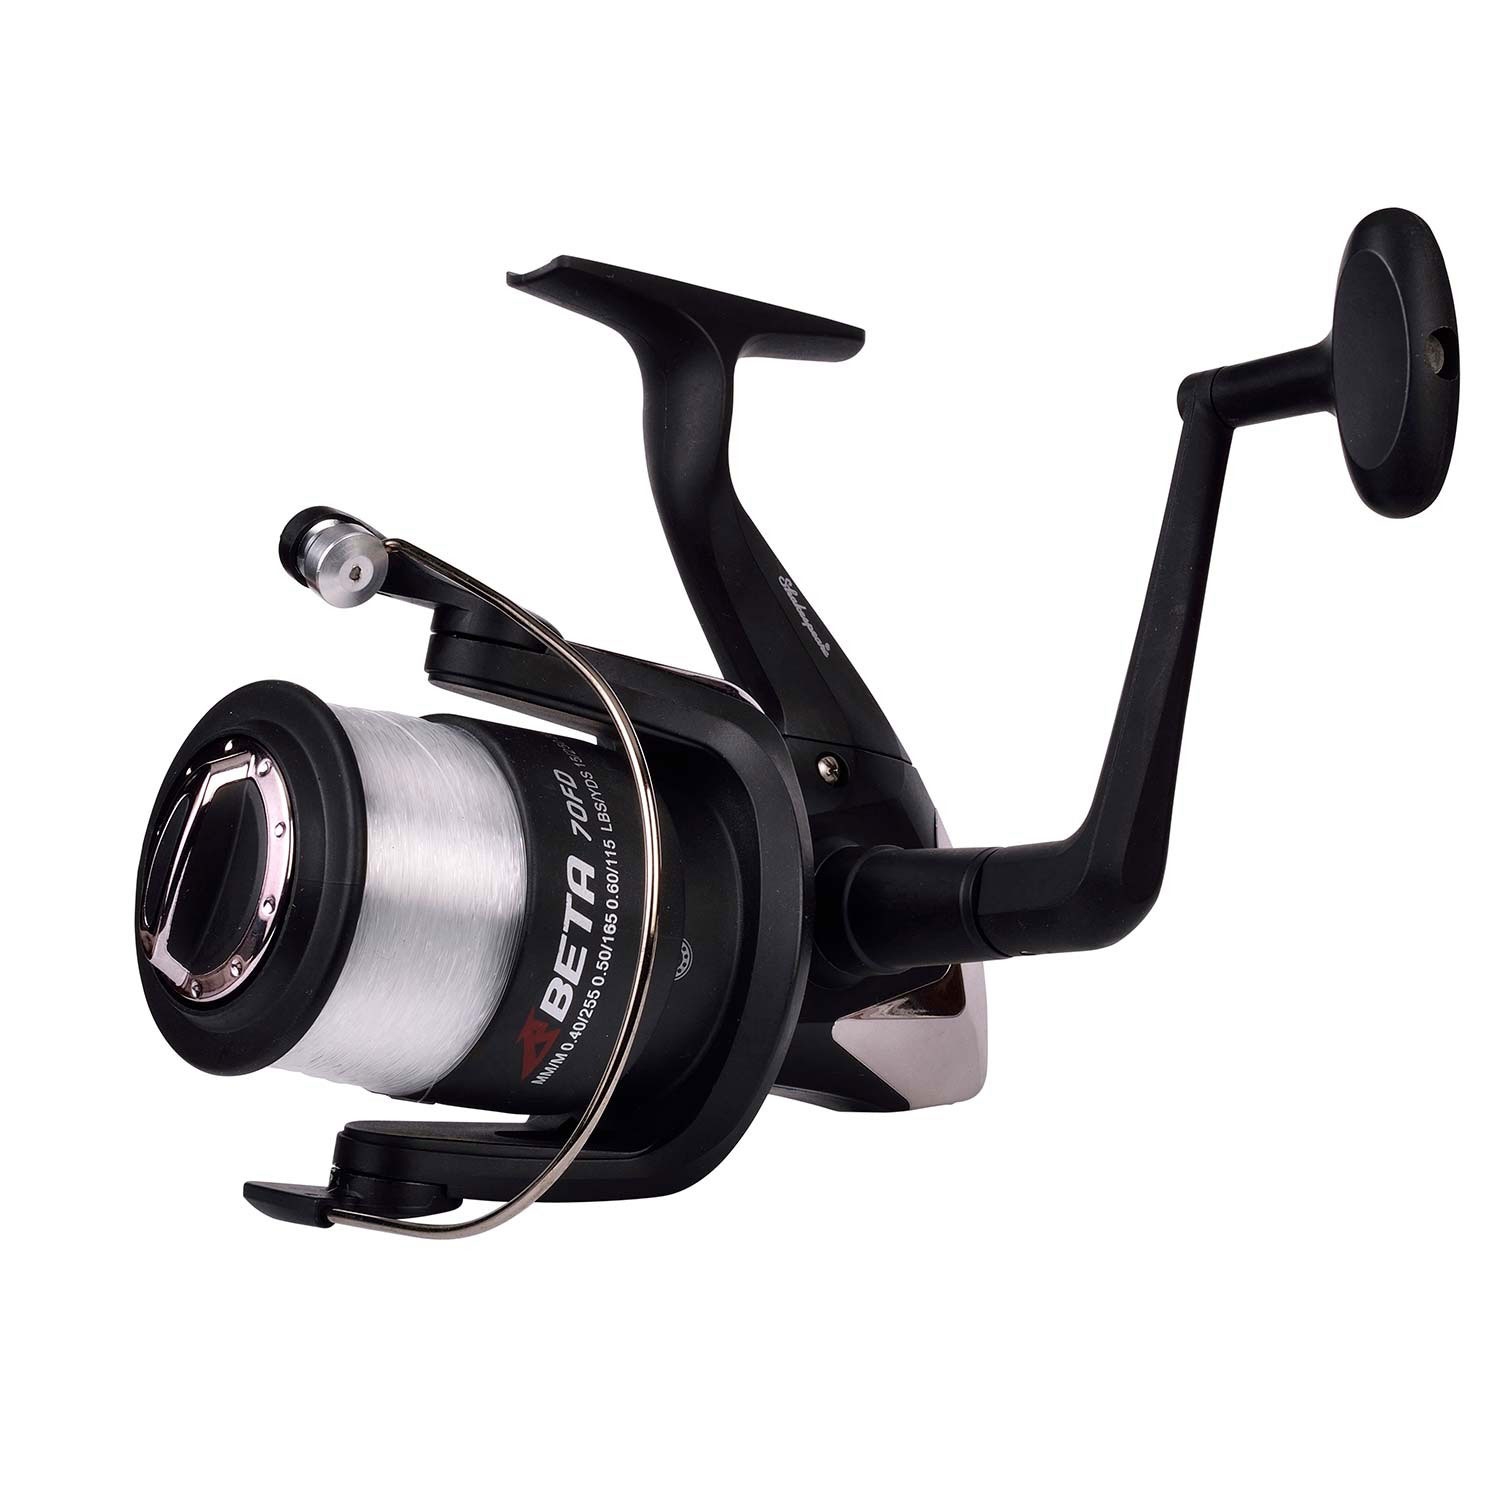 Shakespeare Beta Heavy Spin FD Reel - Front Drag Fishing Spinning